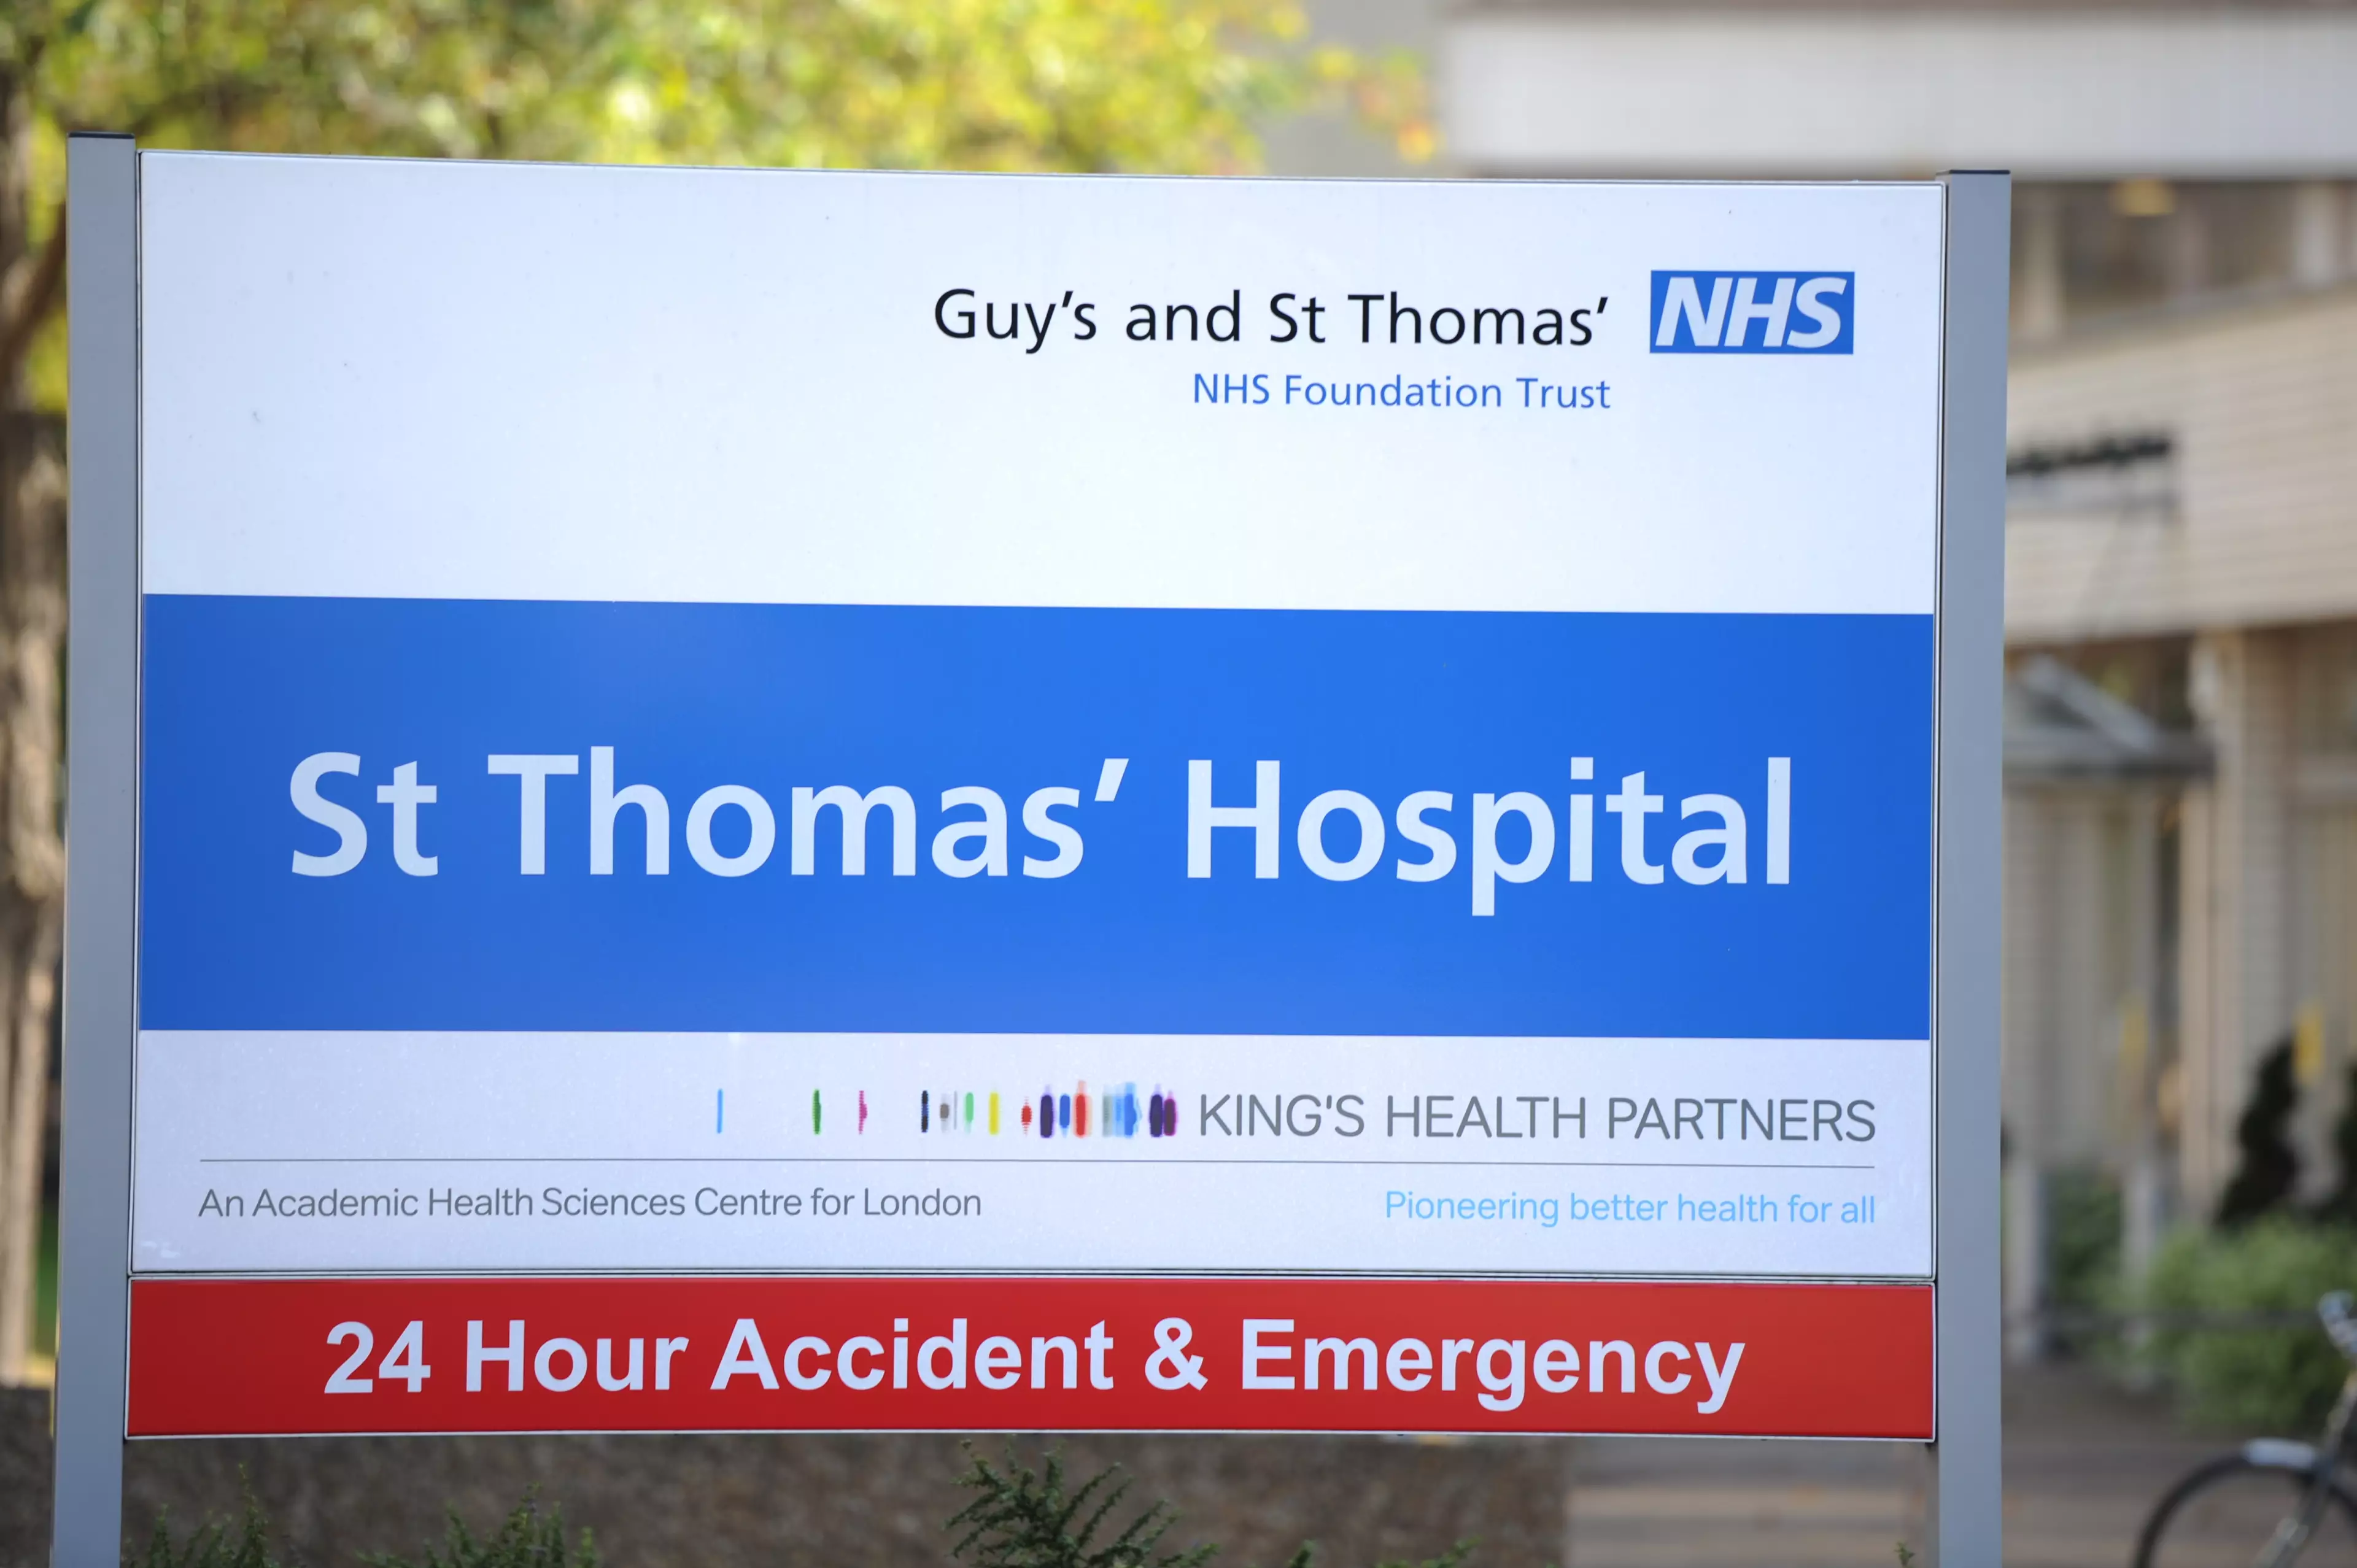 The patient was transferred to Guys and St Thomas' Hospital in London.